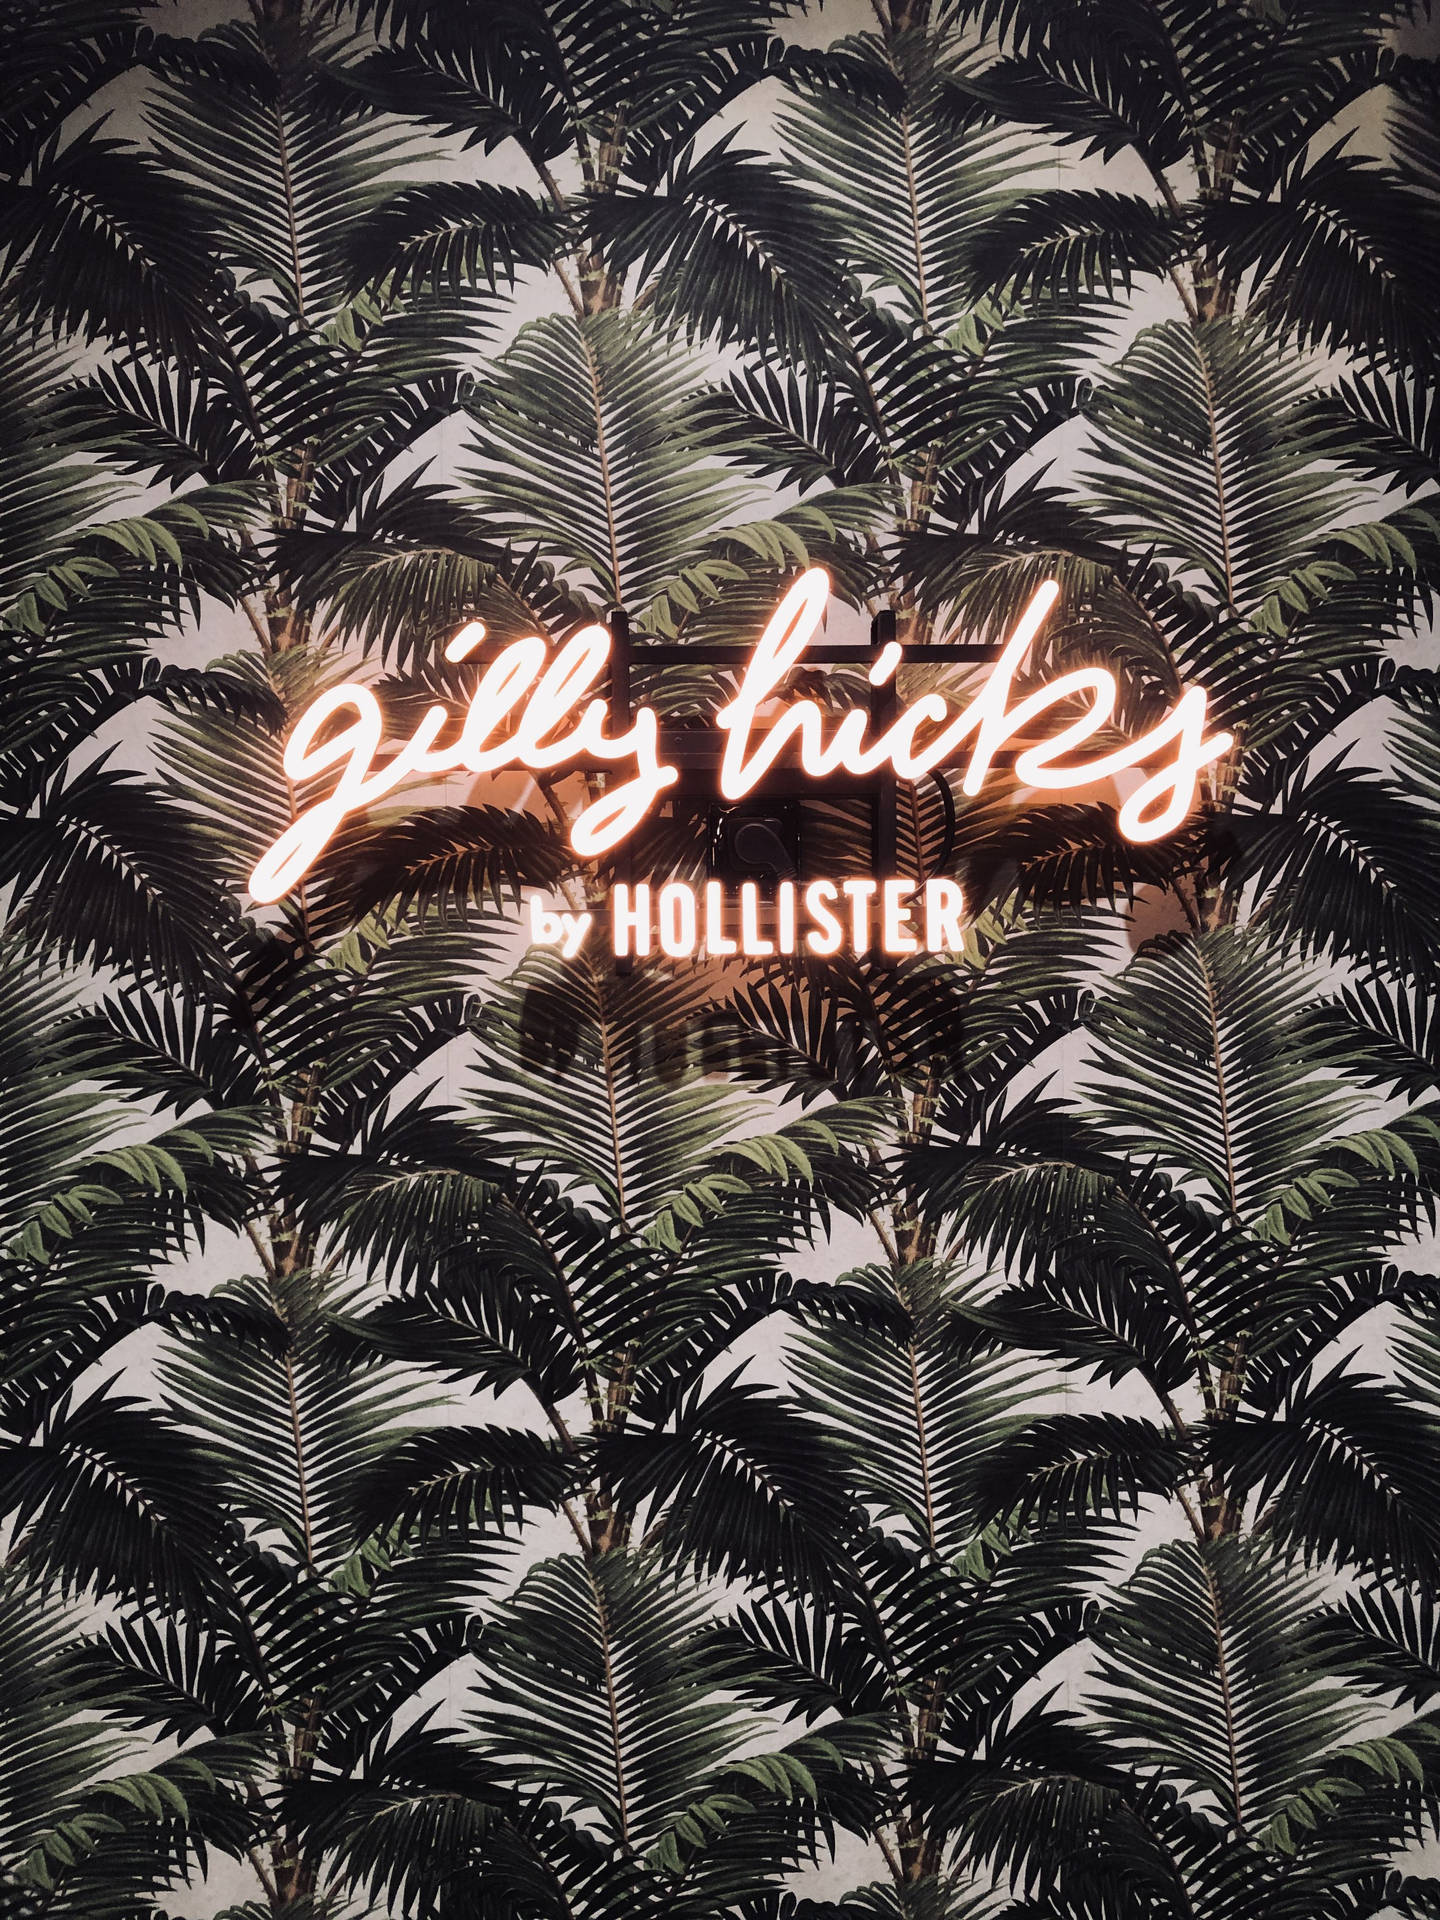 Hollister Palm Tree Leaves Background